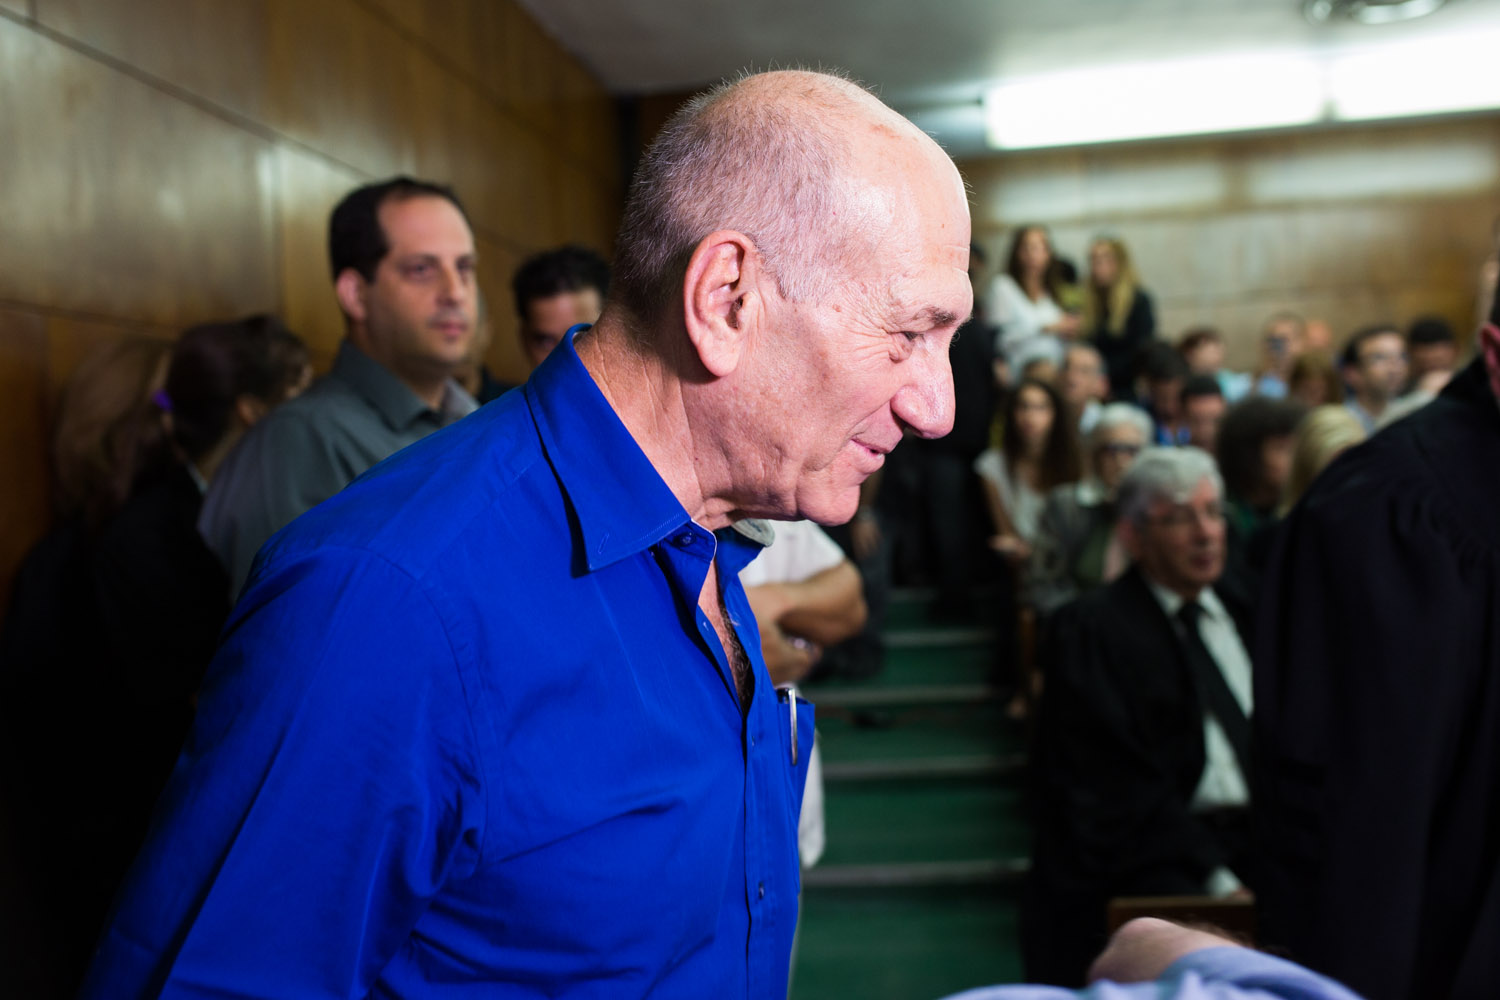 Former Israeli Prime Minister Ehud Olmert seen at the District Court in Tel Aviv where he was brought on charges of accepting bribes linked to the Holyland Park residential project in Jerusalem. Olmert allegedly took the bribes from Holylands developers and the company Hazera Genetics during his time as Jerusalem mayor and minister of industry, trade and labor. May 13, 2014. Photo by Yotam Ronen/POOL/Flash90 *** Local Caption *** øàù äîîùìä ìùòáø àäåã àåìîøè îâéò ì âæø ãéðå